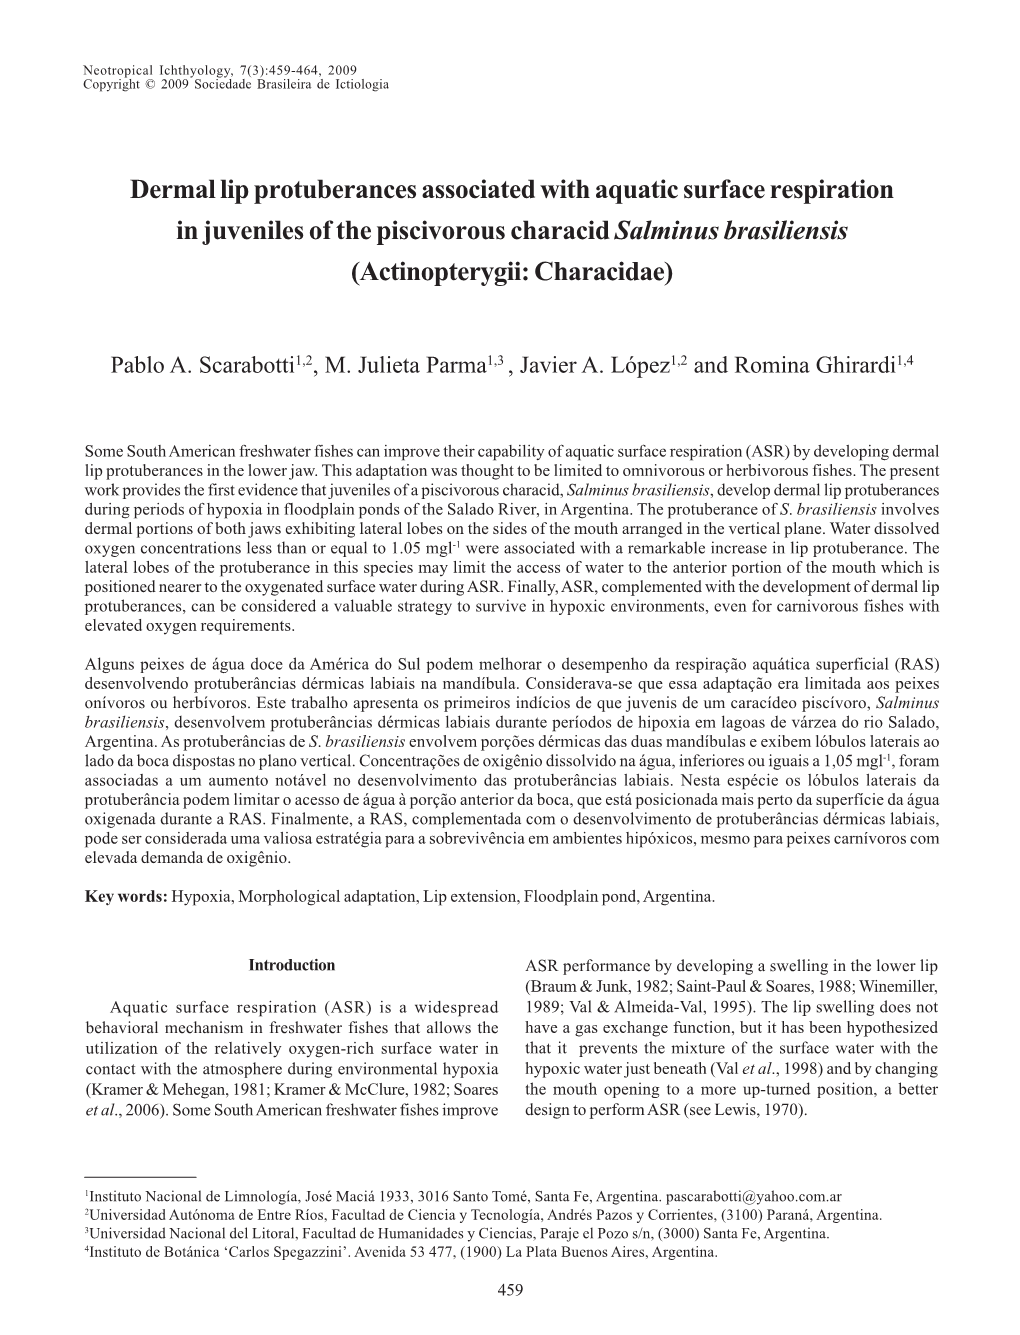 Dermal Lip Protuberances Associated with Aquatic Surface Respiration in Juveniles of the Piscivorous Characid Salminus Brasiliensis (Actinopterygii: Characidae)